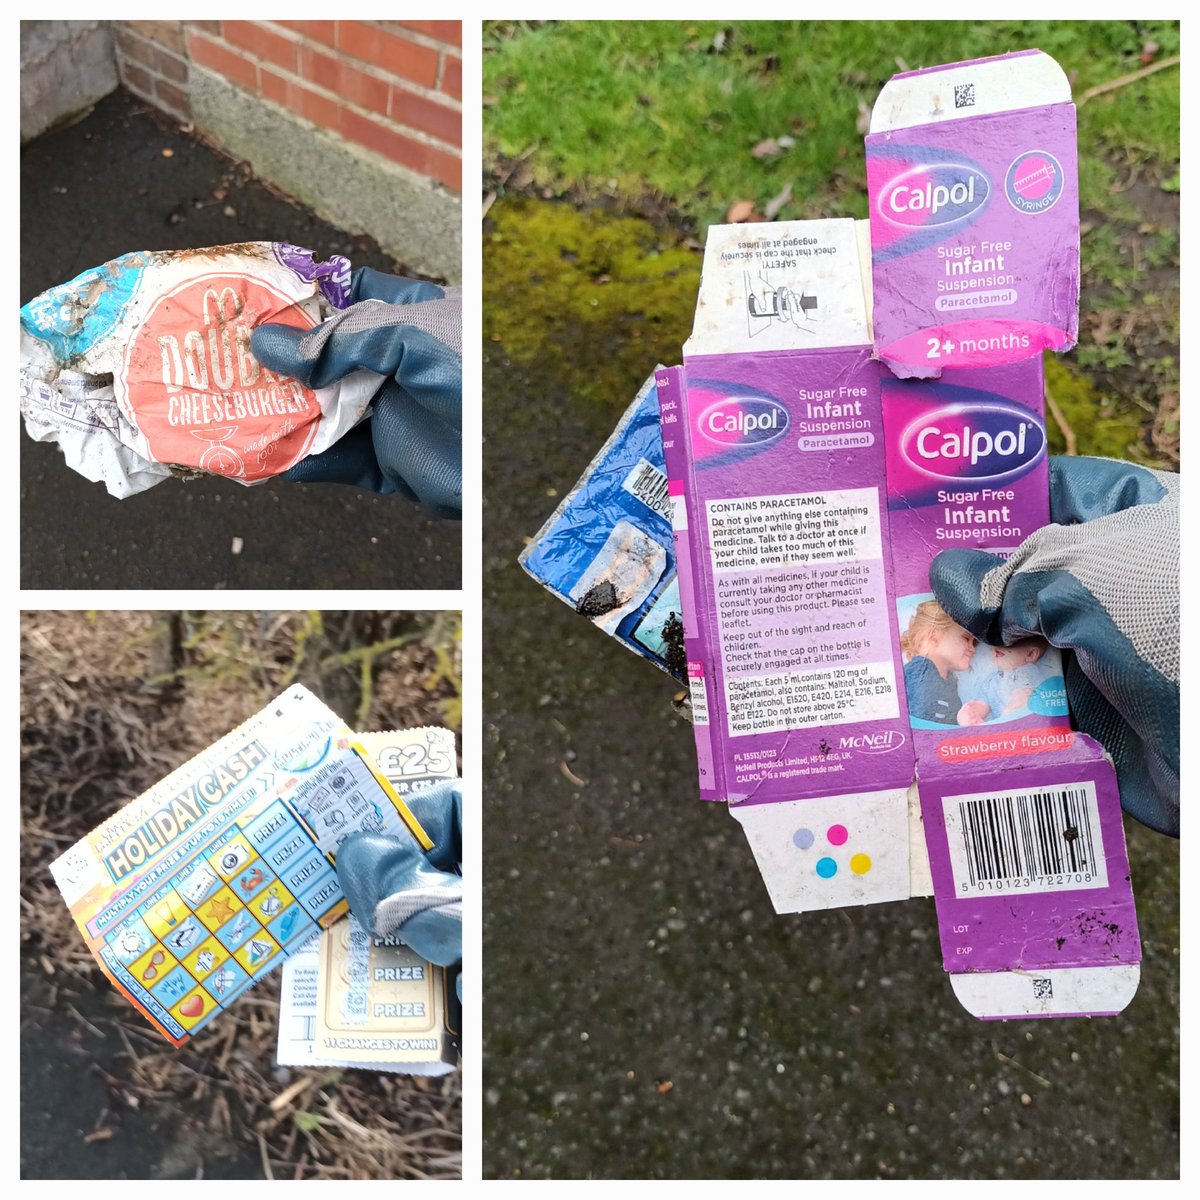 Been away for a few days 🤠🎵🎸, but still managed some #litter picking earlier in the week. #Northumberland @Cleanup_UK @cleanupbritain @KeepBritainTidy